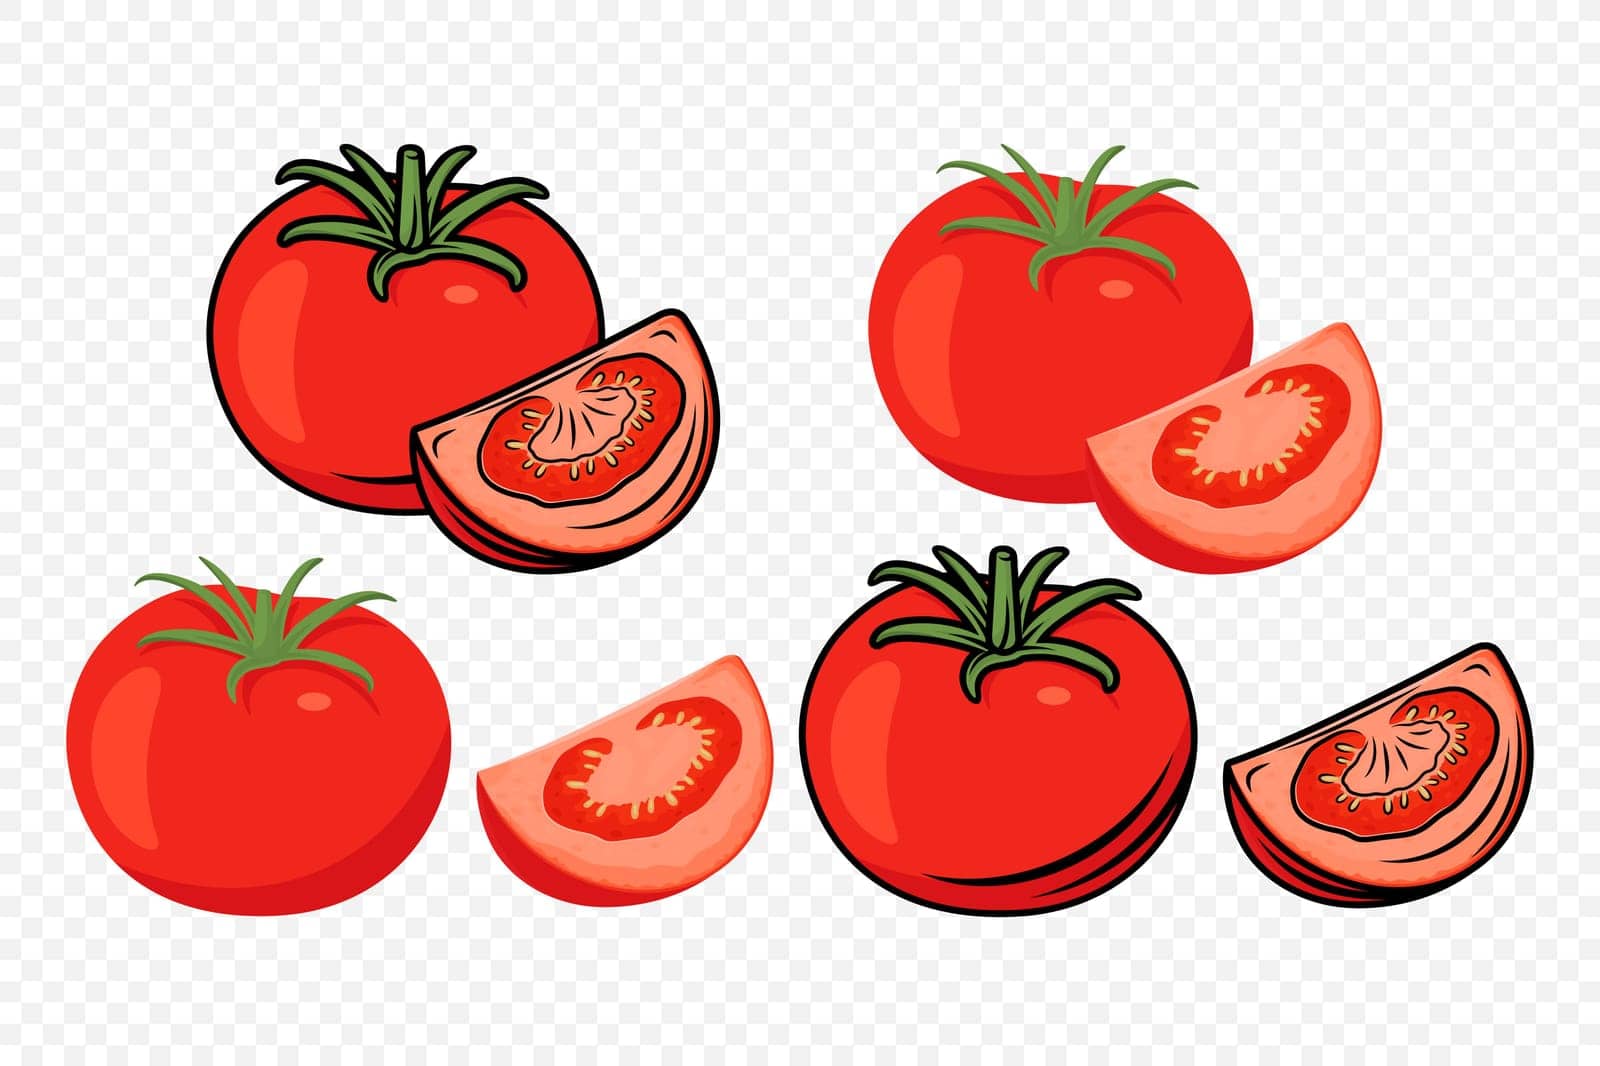 Flat Vector Fresh Tomato Icon Set Isolated. Whole and Quartered Tomatoes Design Templates for Recipes, Menus, Culinary. Organic Tomato Clipart, Logo, Front View by Gomolach